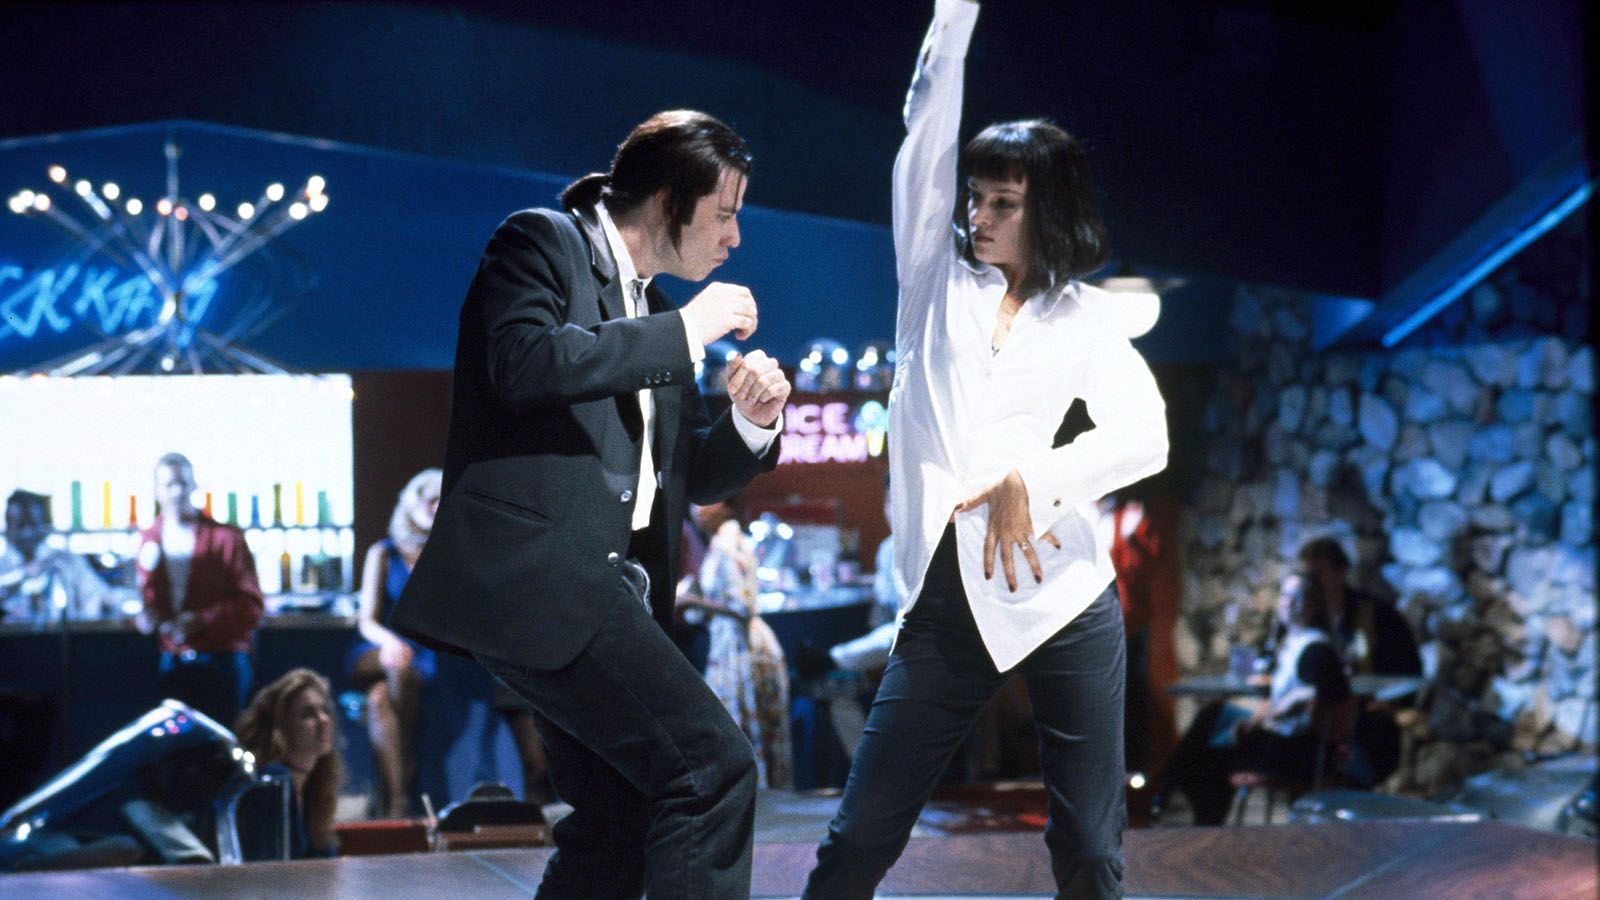 "Pulp Fiction" tops ScreenTime's list of the top movies of the '90s.